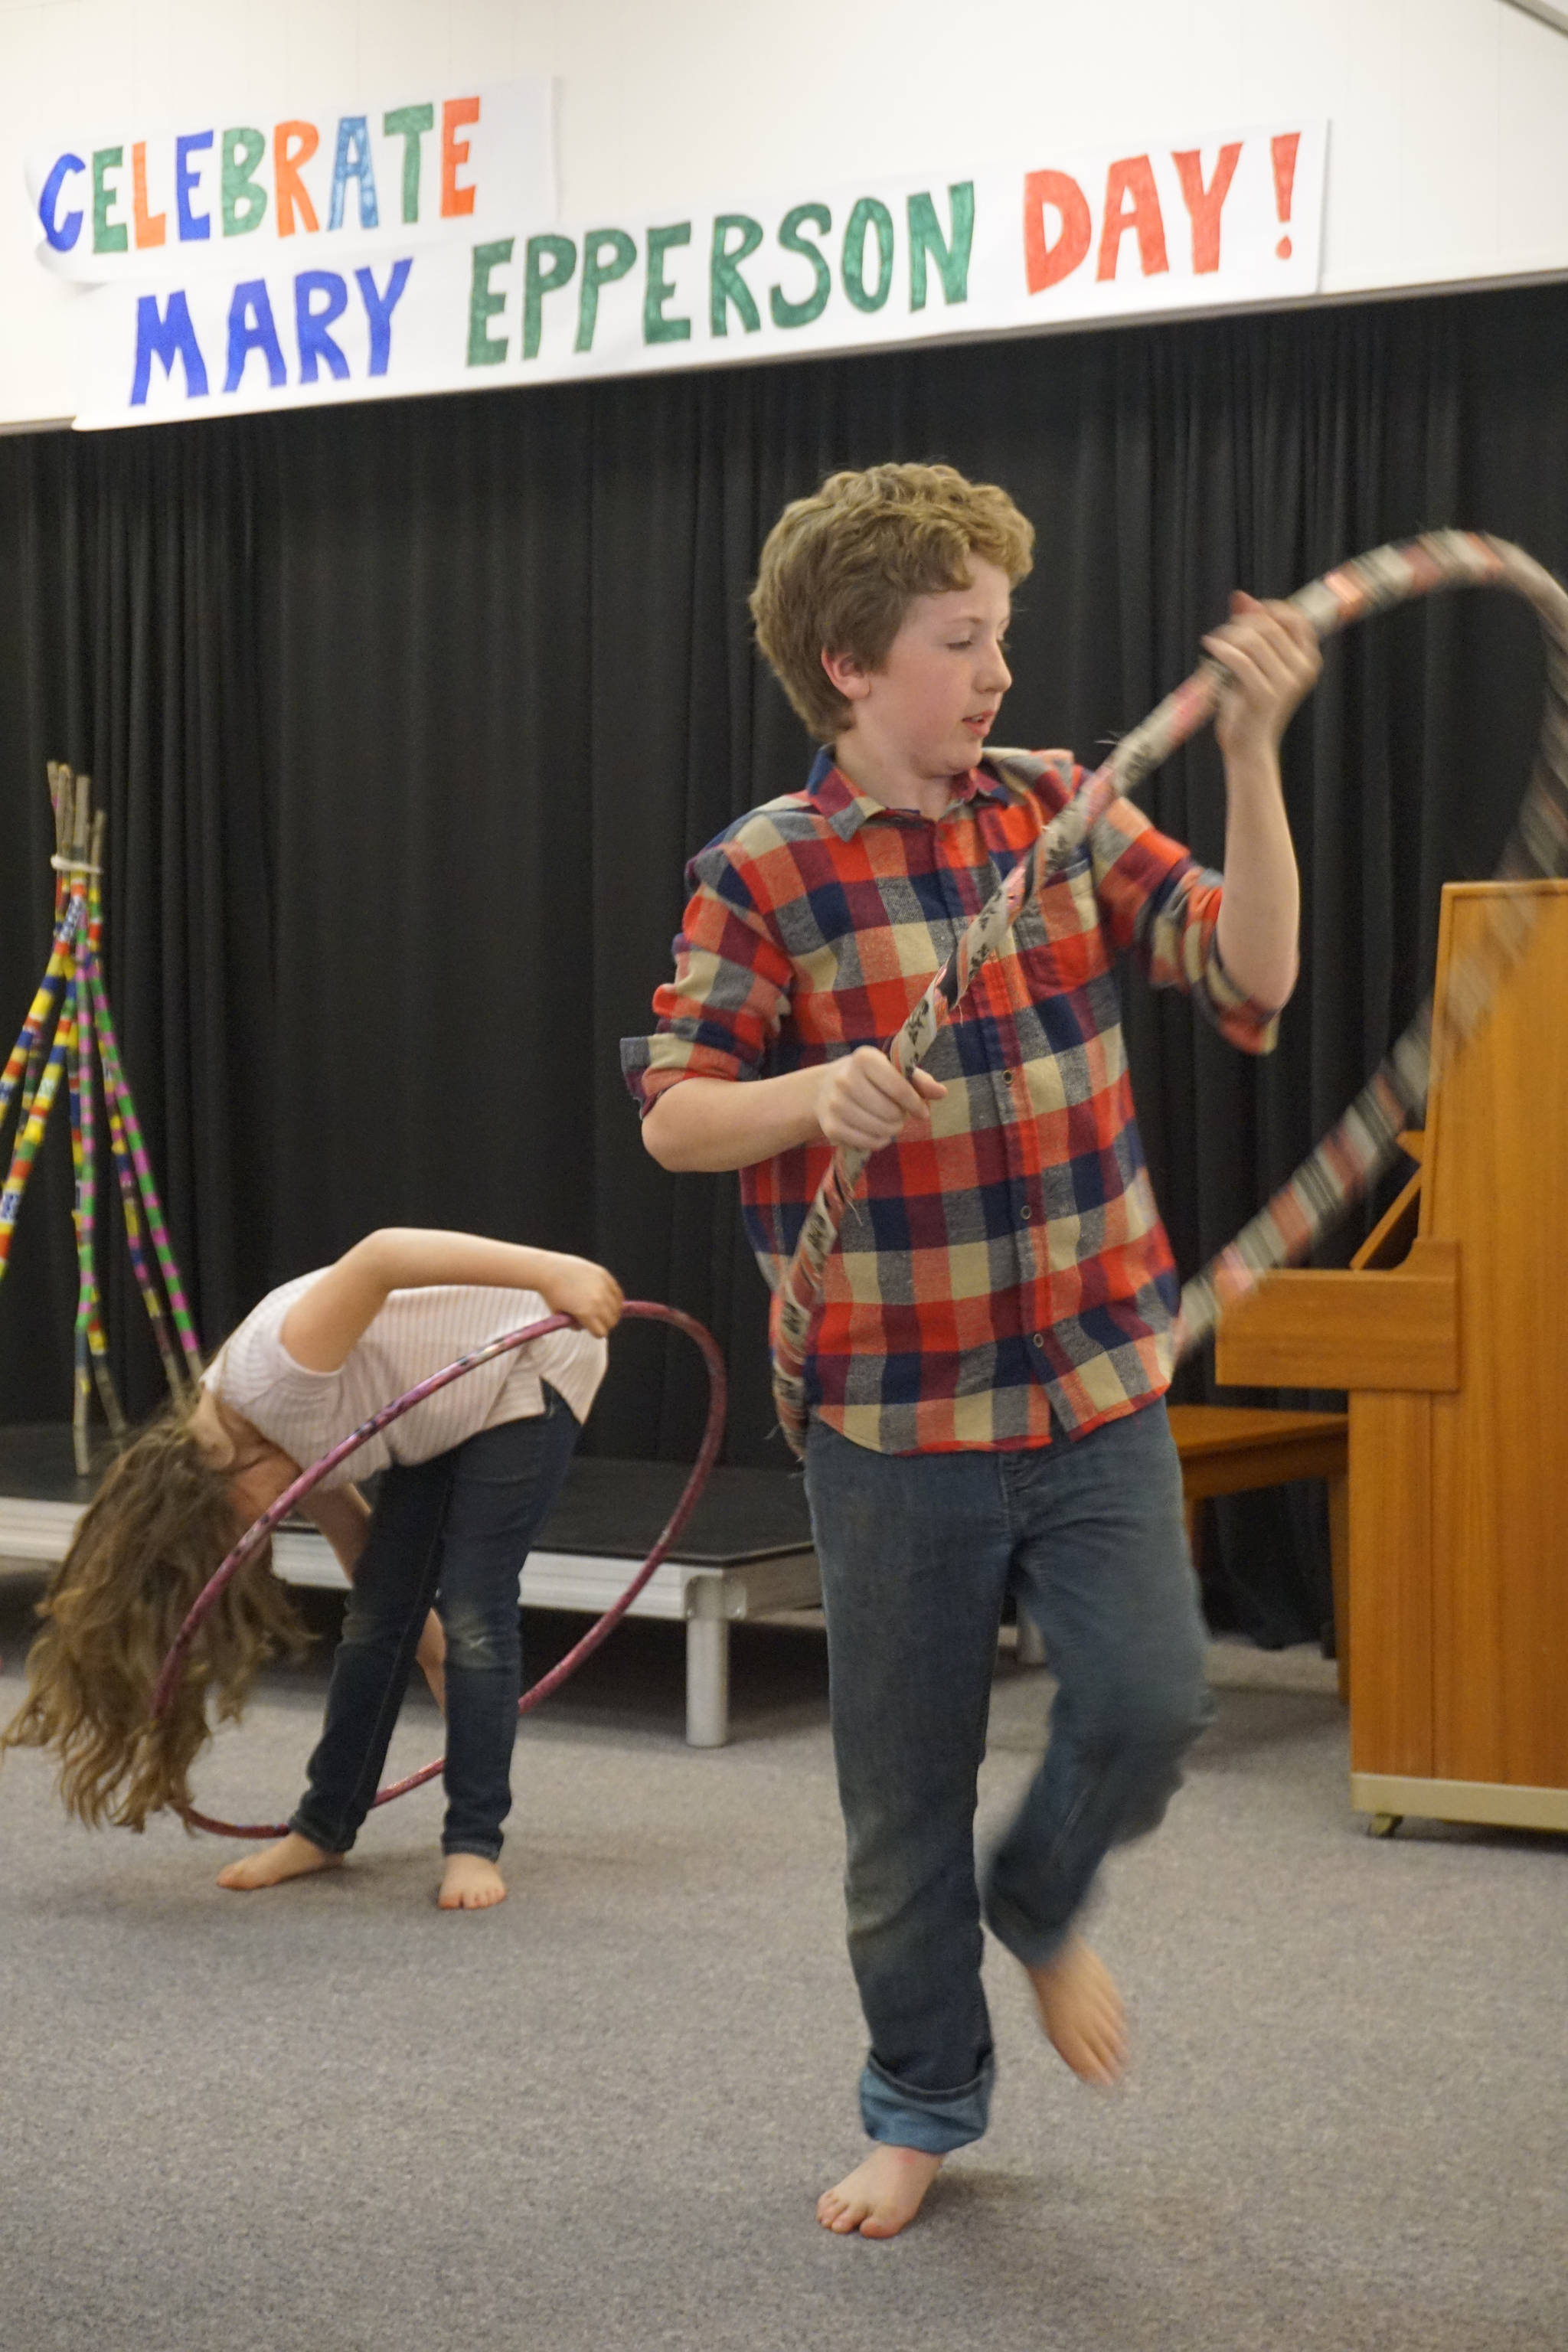 Will Bradshaw, center, and Grace Bradshaw, left, spin hoops for Mary Epperson Day on Tuesday, June 6, at the Homer Council on the Arts. The event was a fundraiser to raise the final $50,000 of the project.